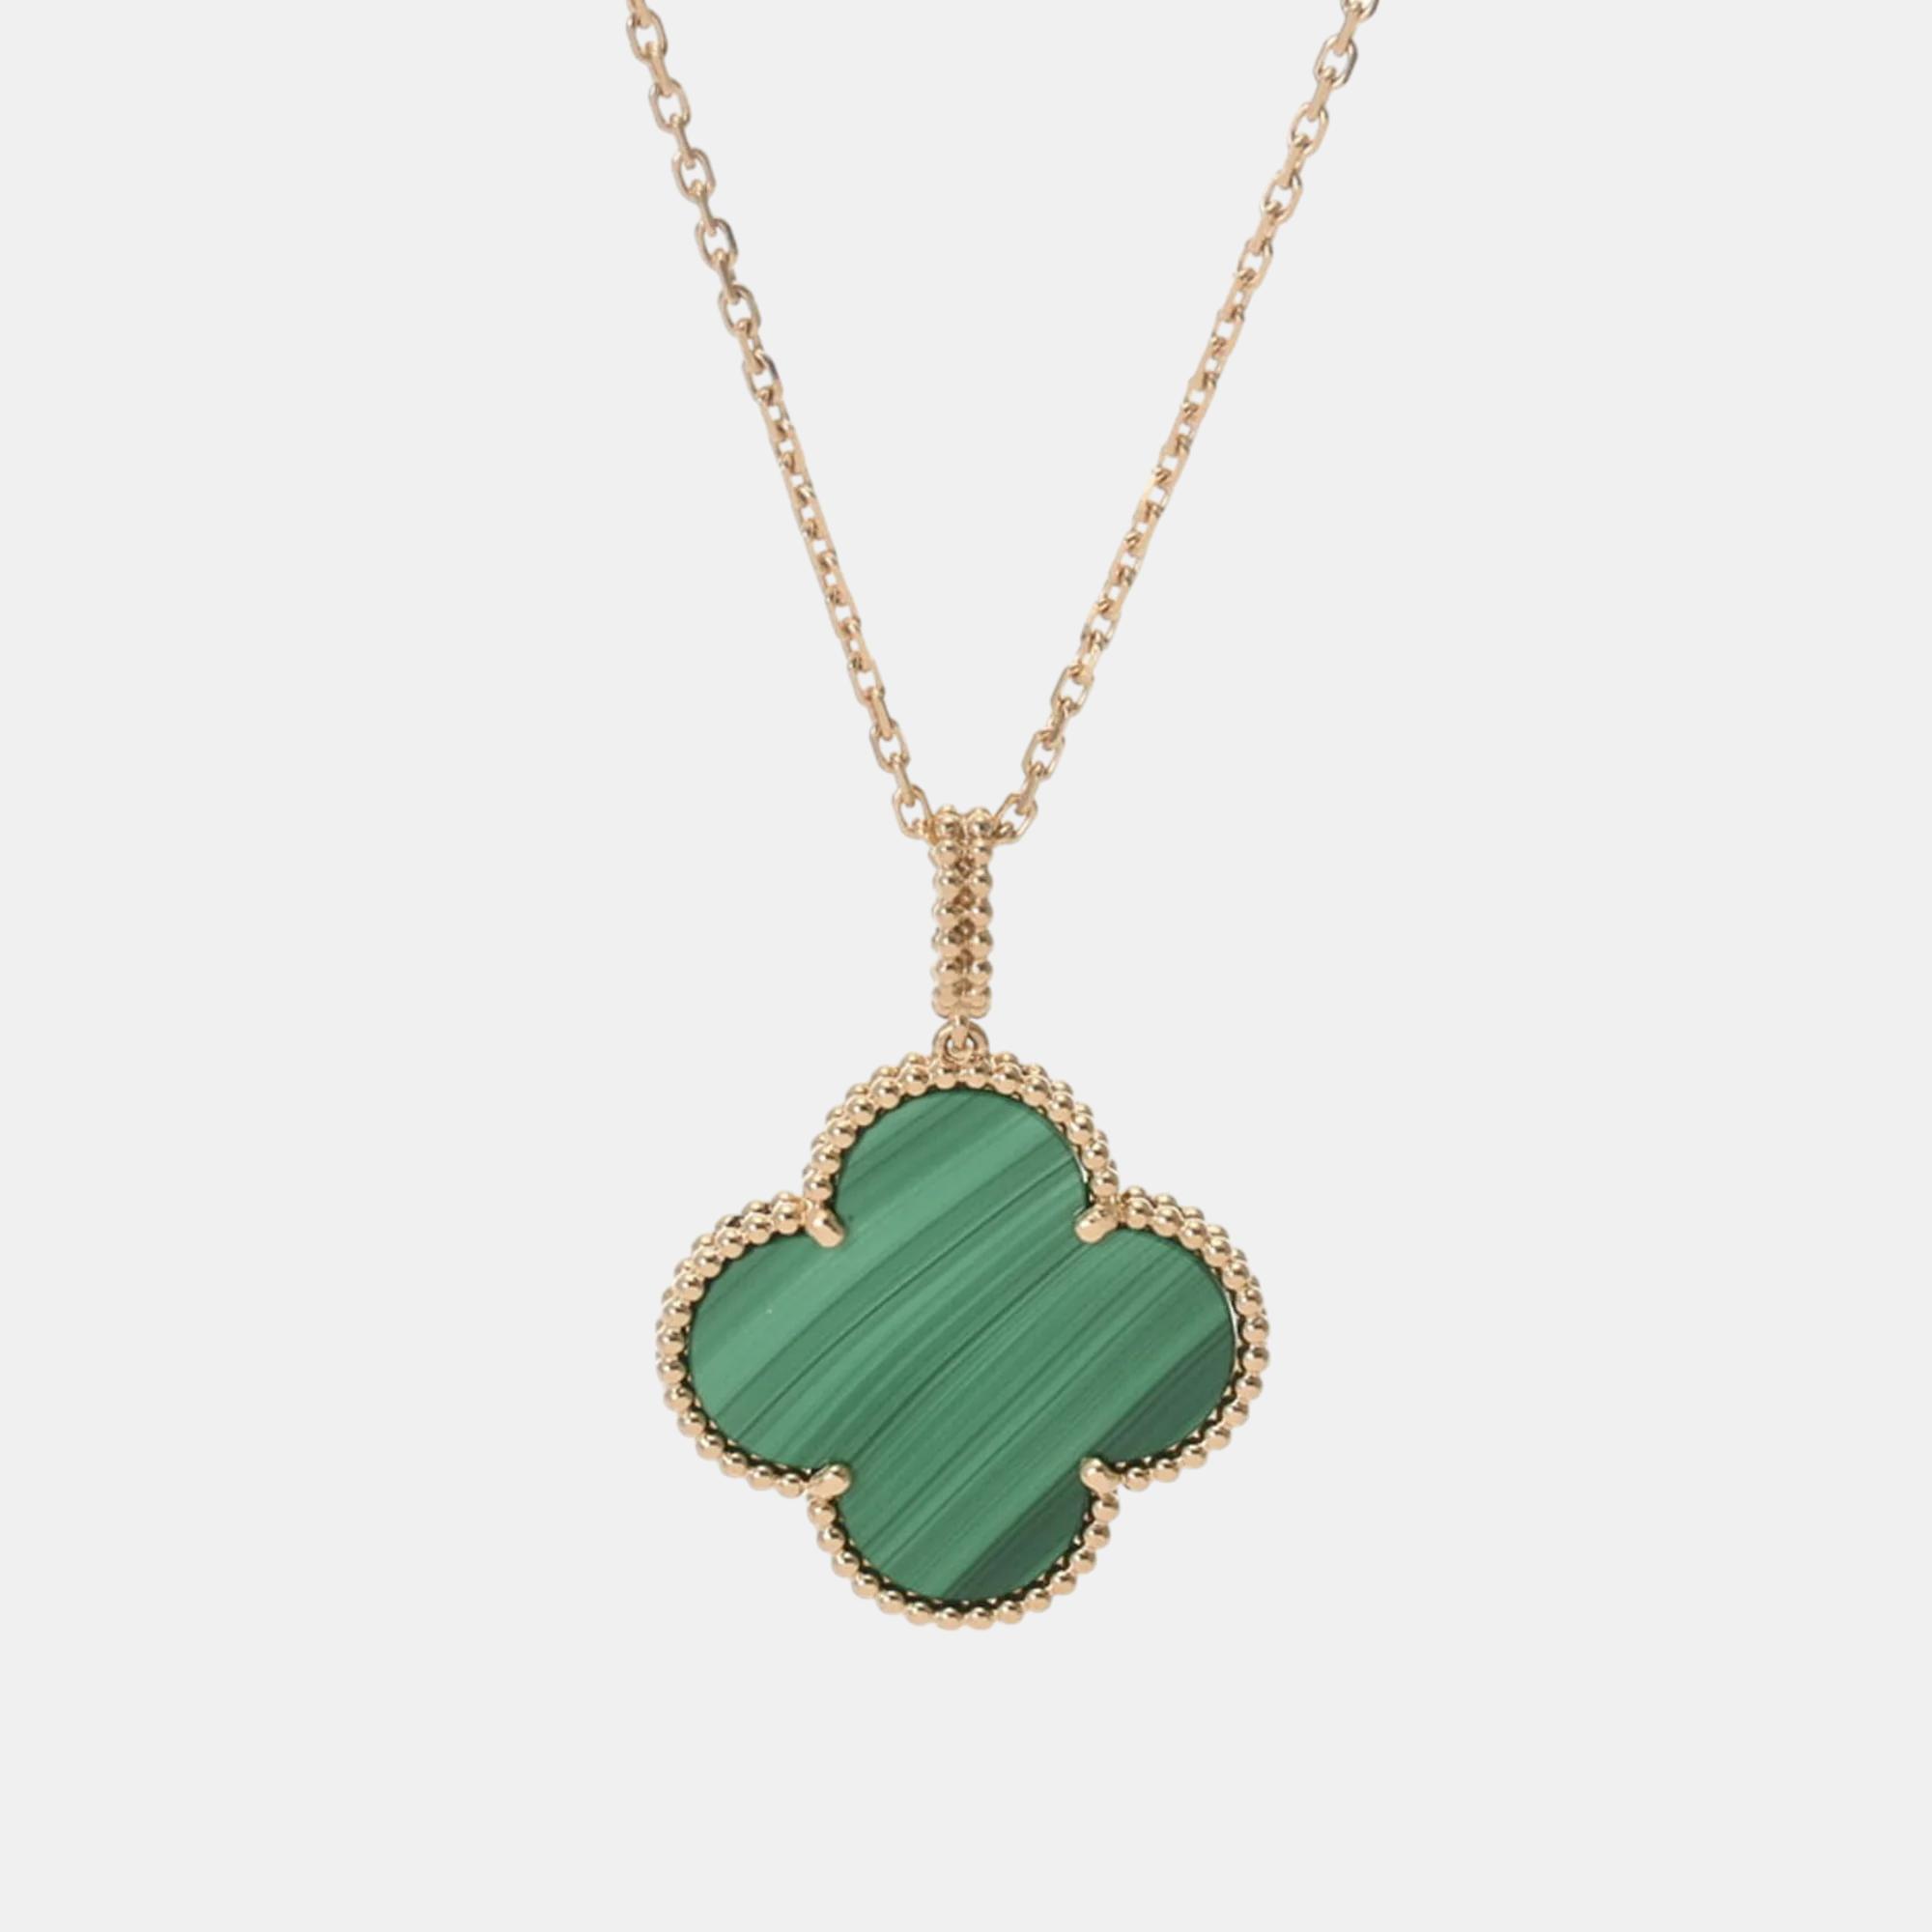 Van cleef & arpels18k yellow gold and malachite magic alhambra long pendant necklace